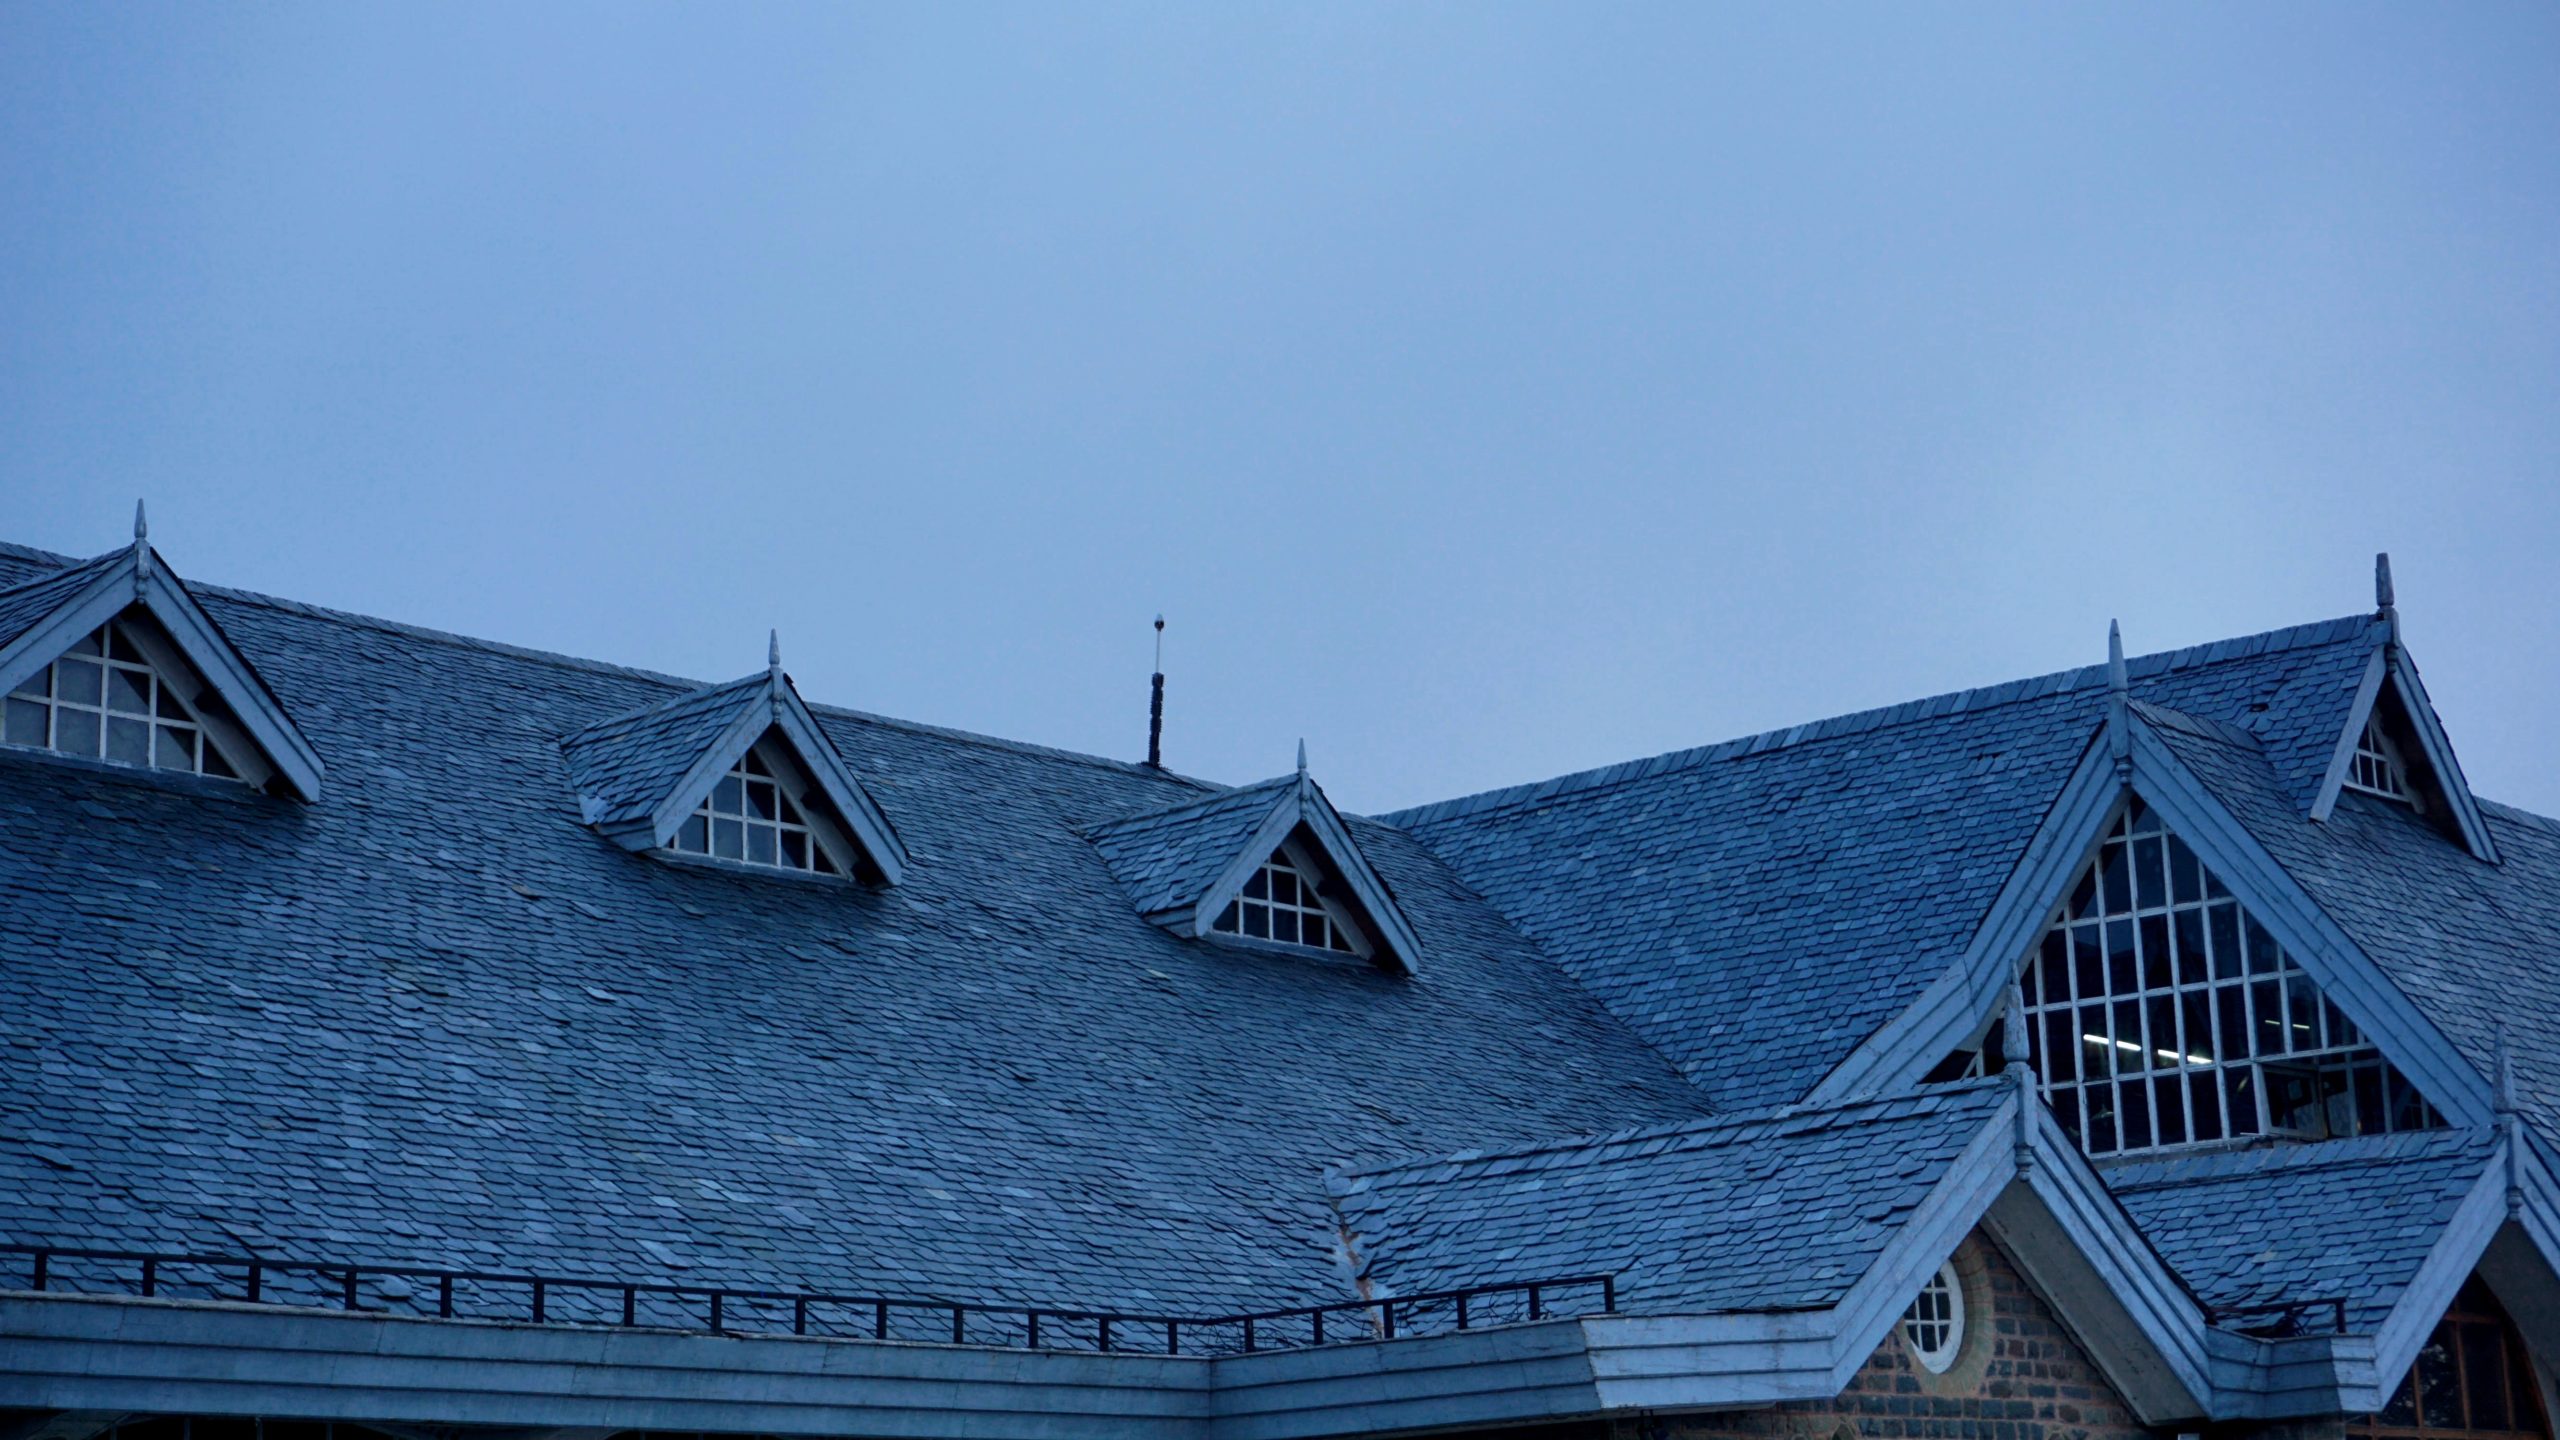 Roofing design with blue skyline